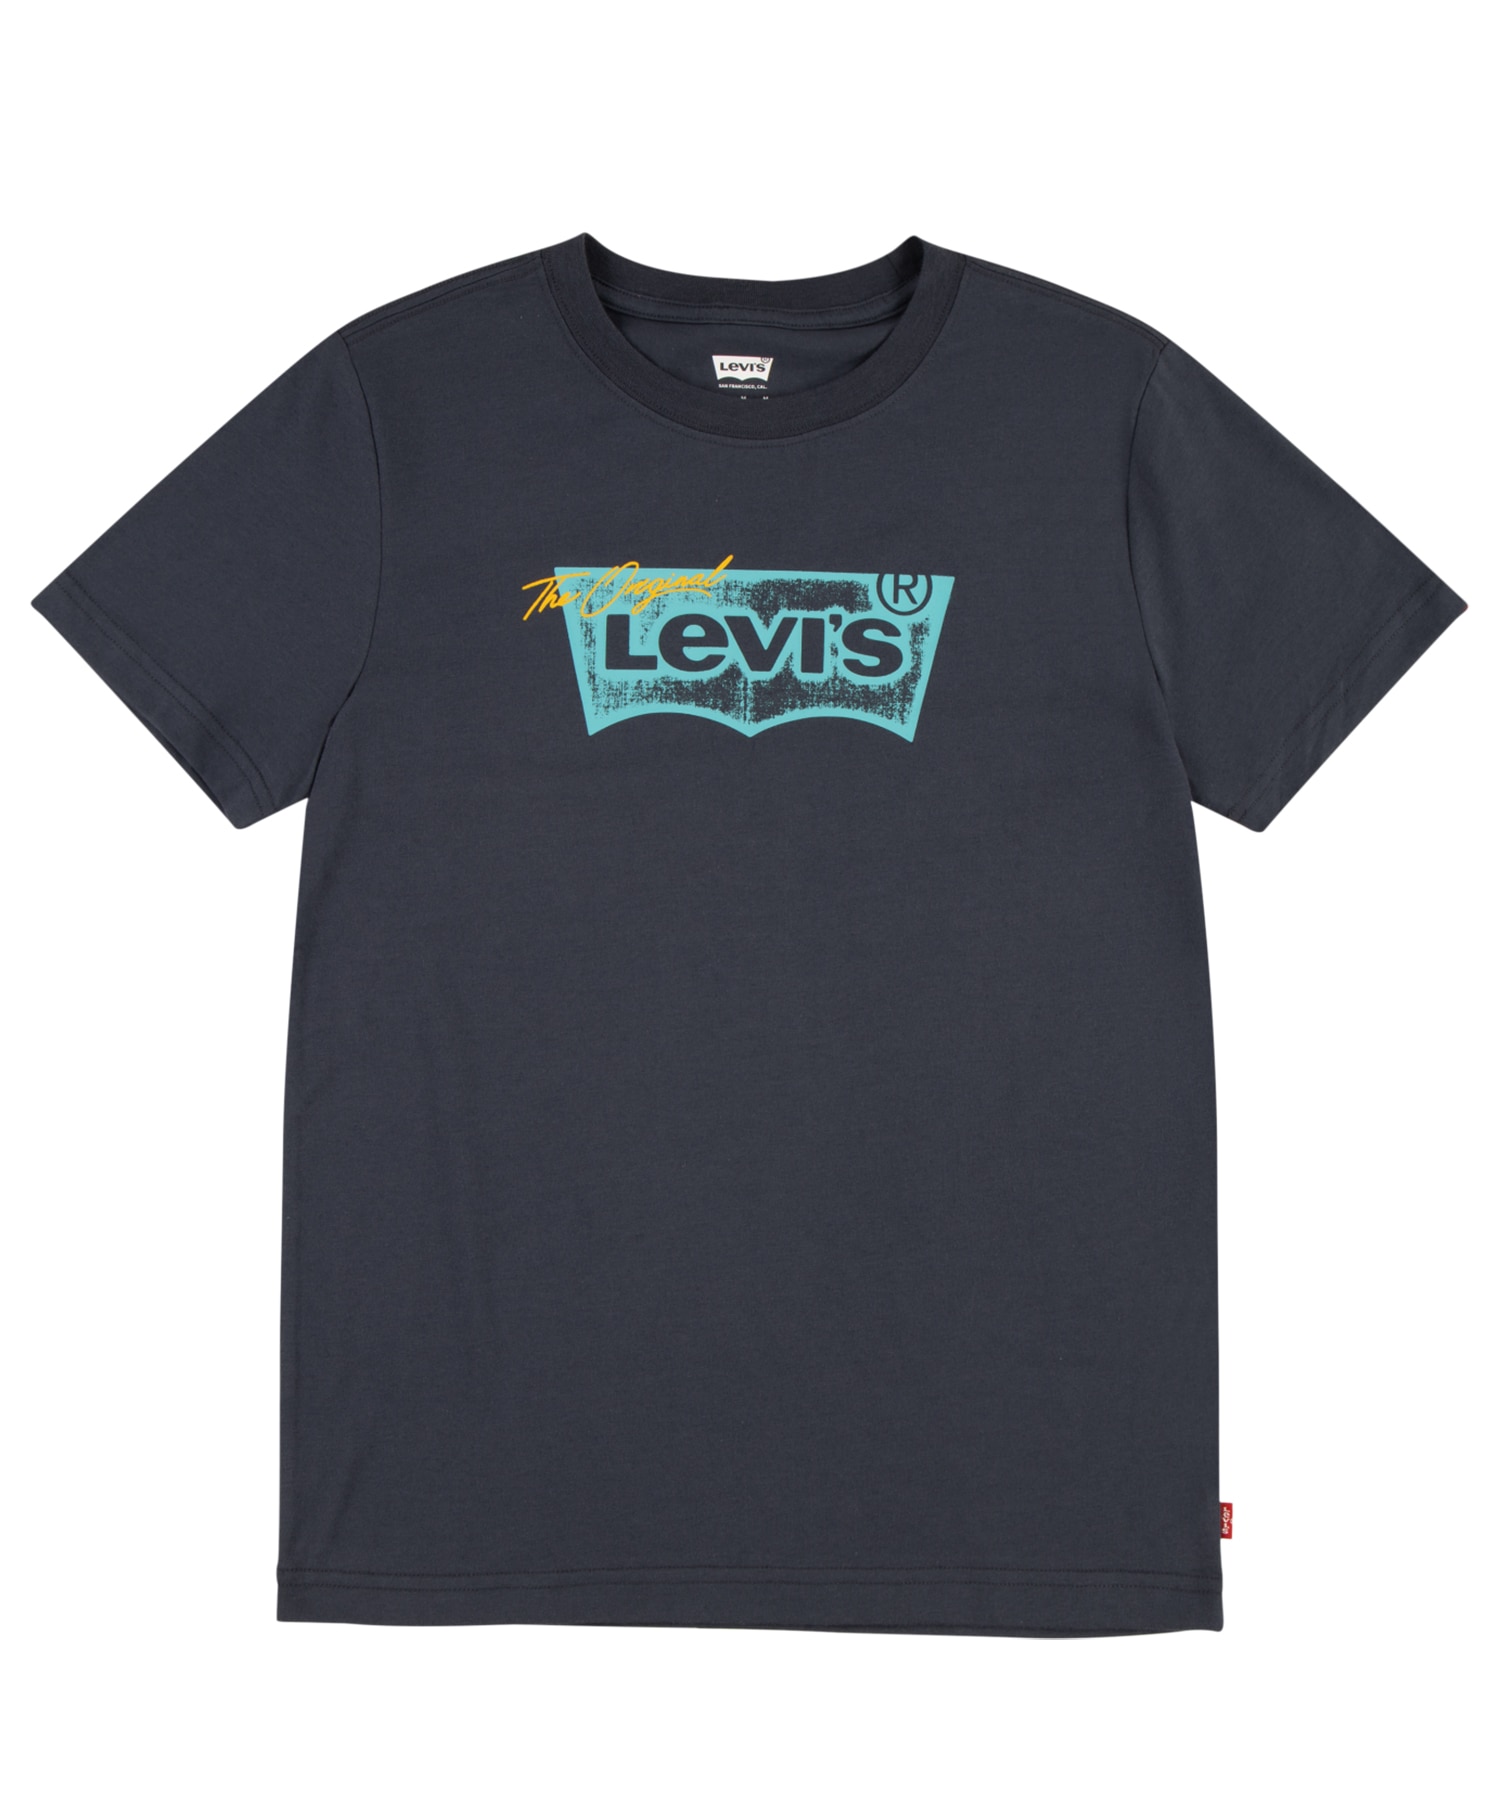 Levi's Distressed Batwing Tee